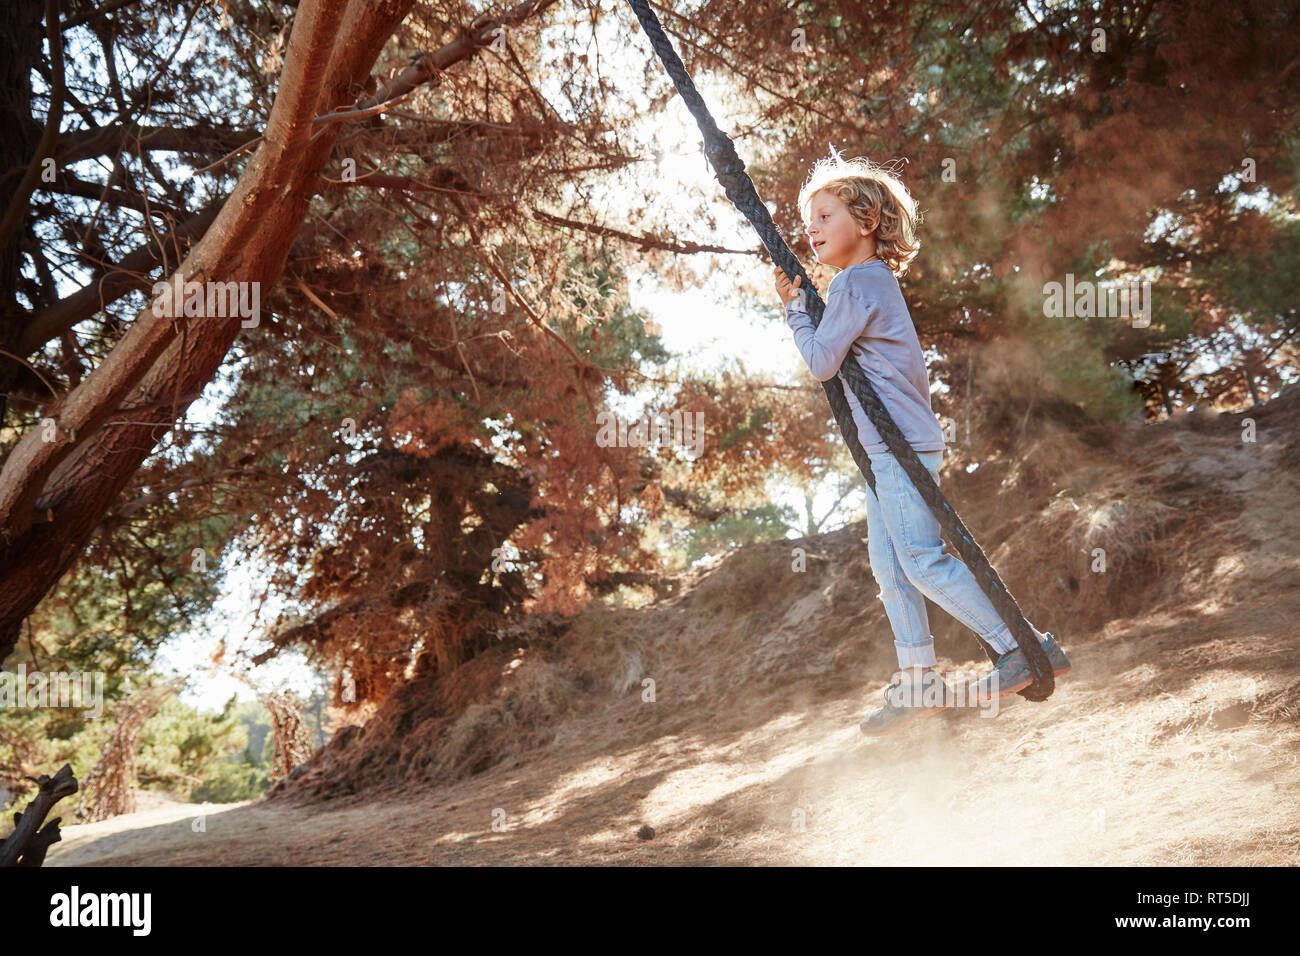 Boy swinging on a rope in backlight Stock Photo